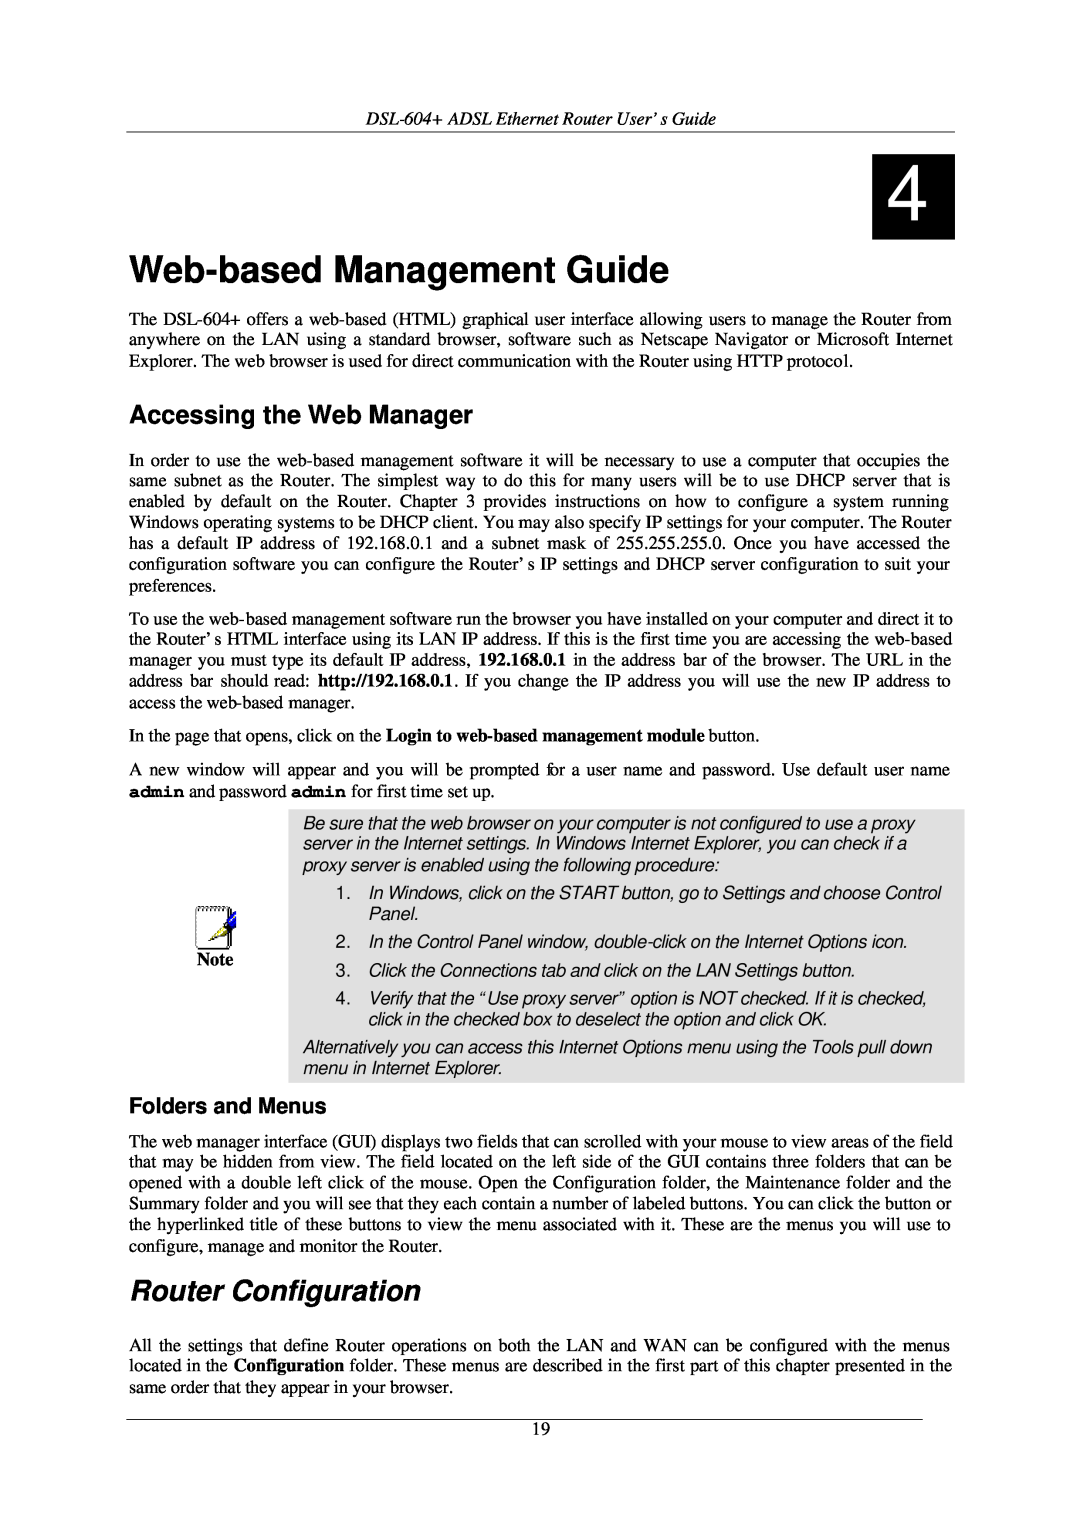 D-Link DSL-604+ manual Web-based Management Guide, Router Configuration, Accessing the Web Manager, Folders and Menus 